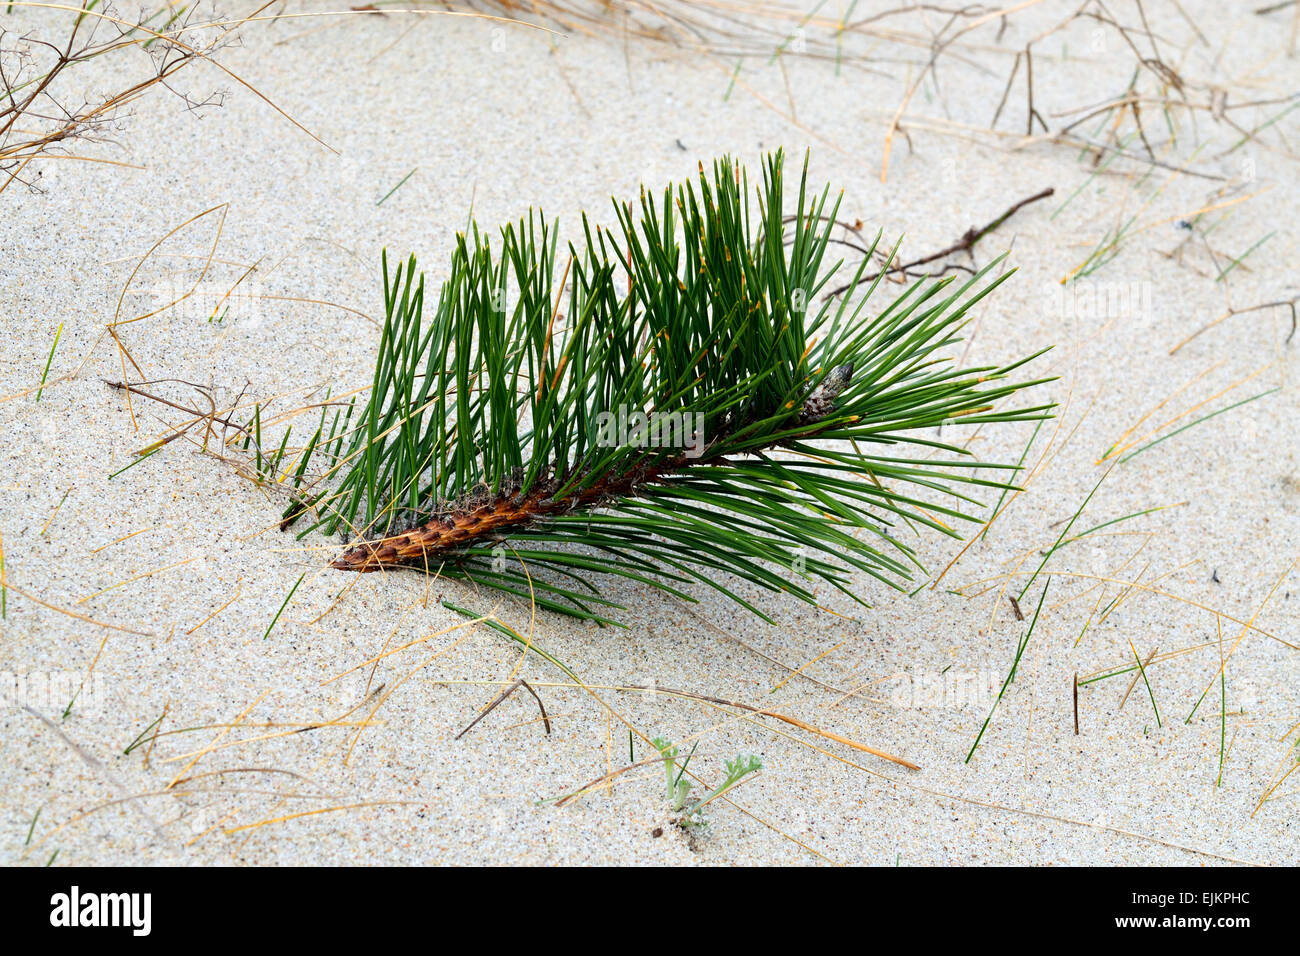 Sprig of pine breaks through the sand Stock Photo